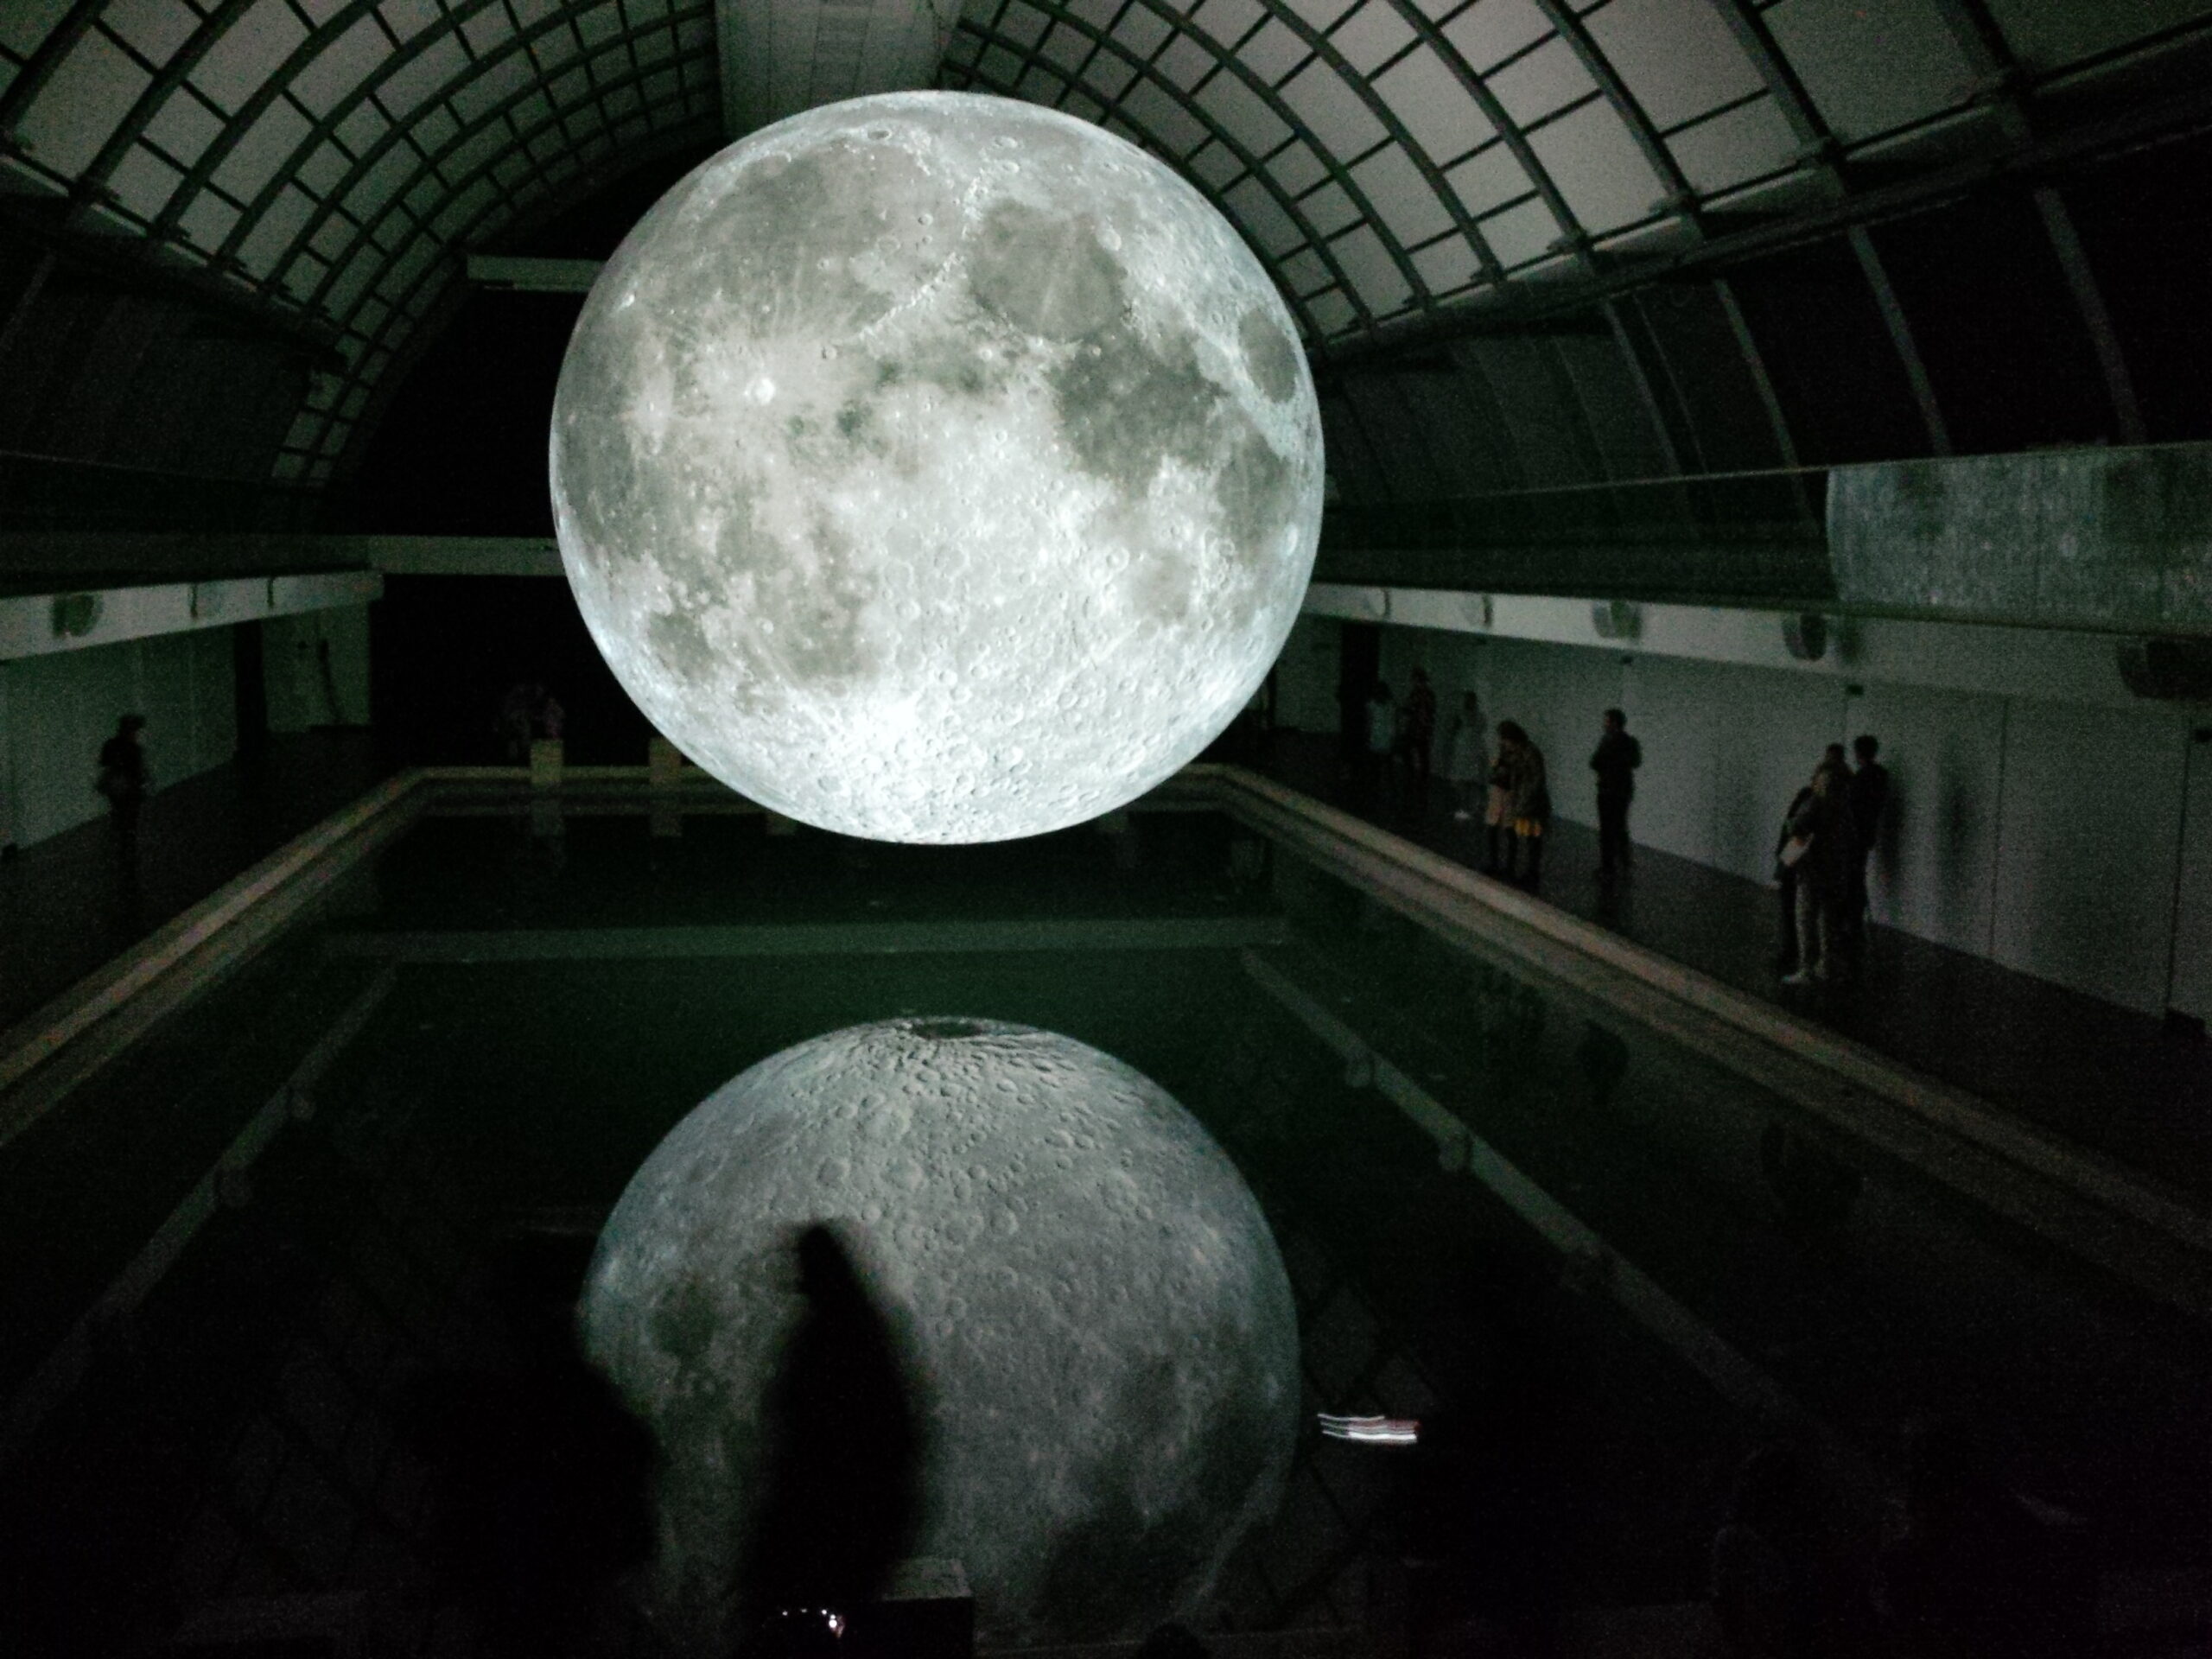 Photo of moon hologram floating on water near people inside room